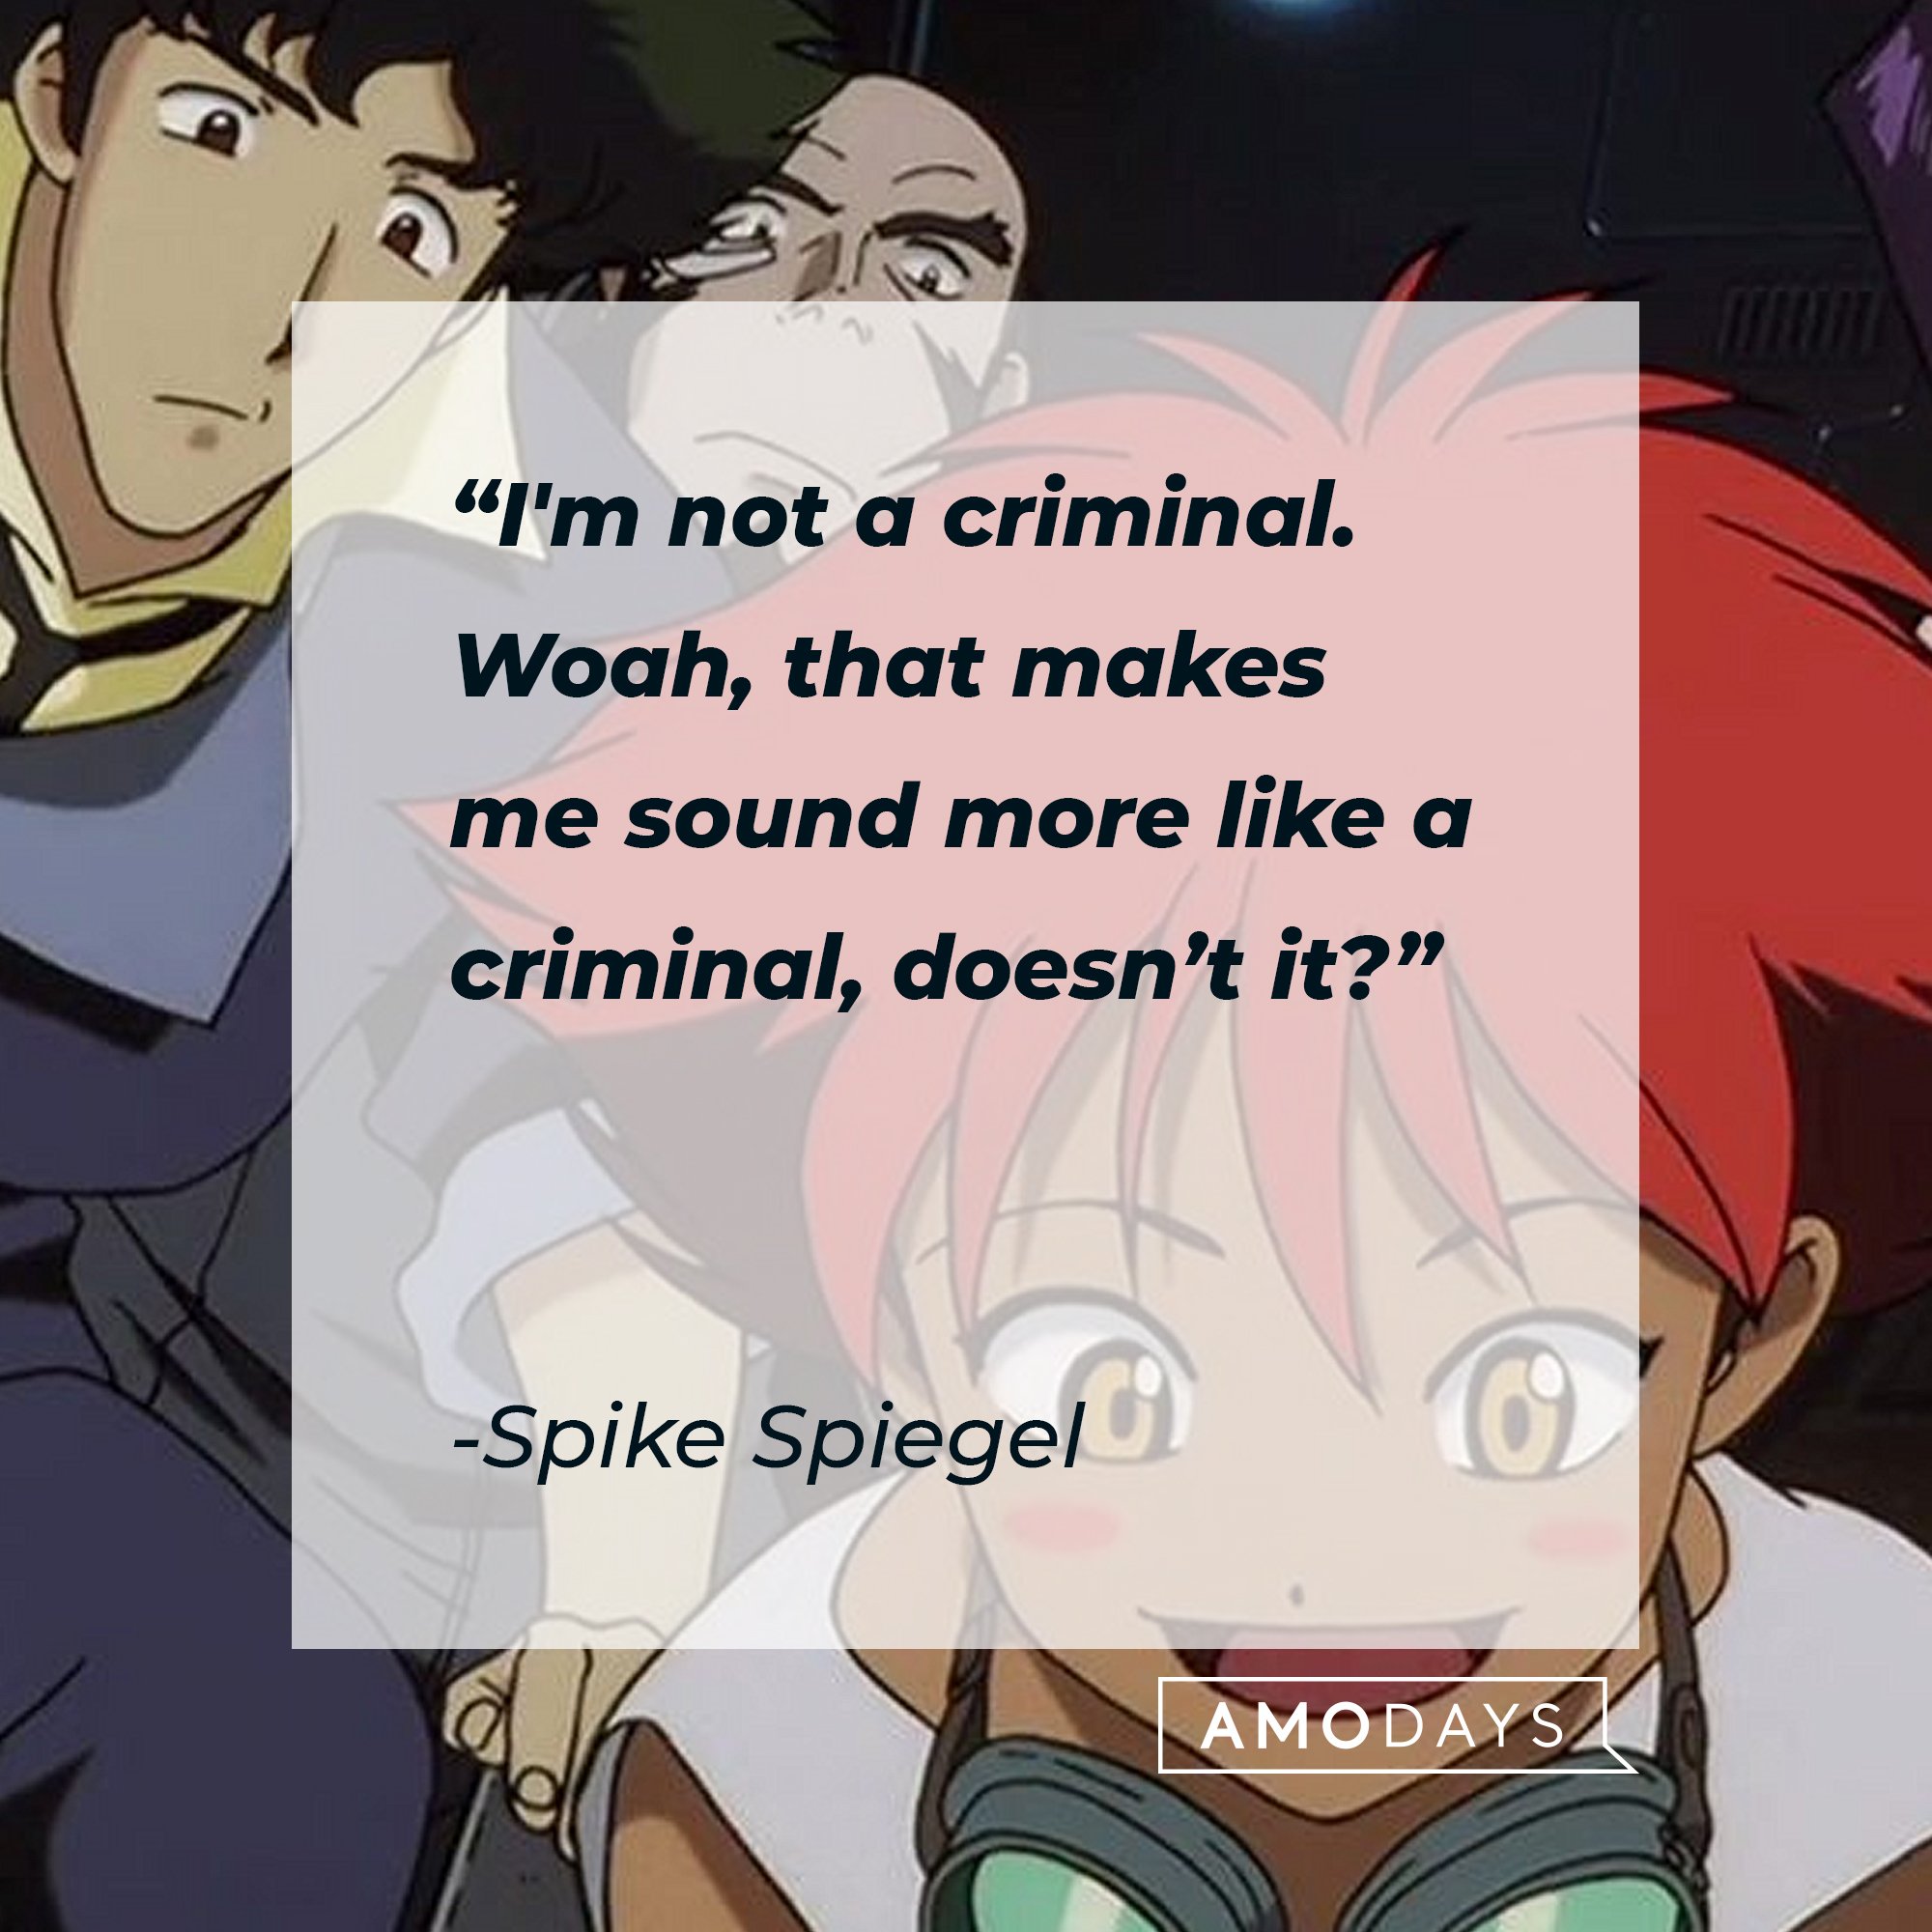 Spike Spiegel's quote: "I'm not a criminal. Woah, that makes me sound more like a criminal, doesn't it?"  | Image: AmoDays 